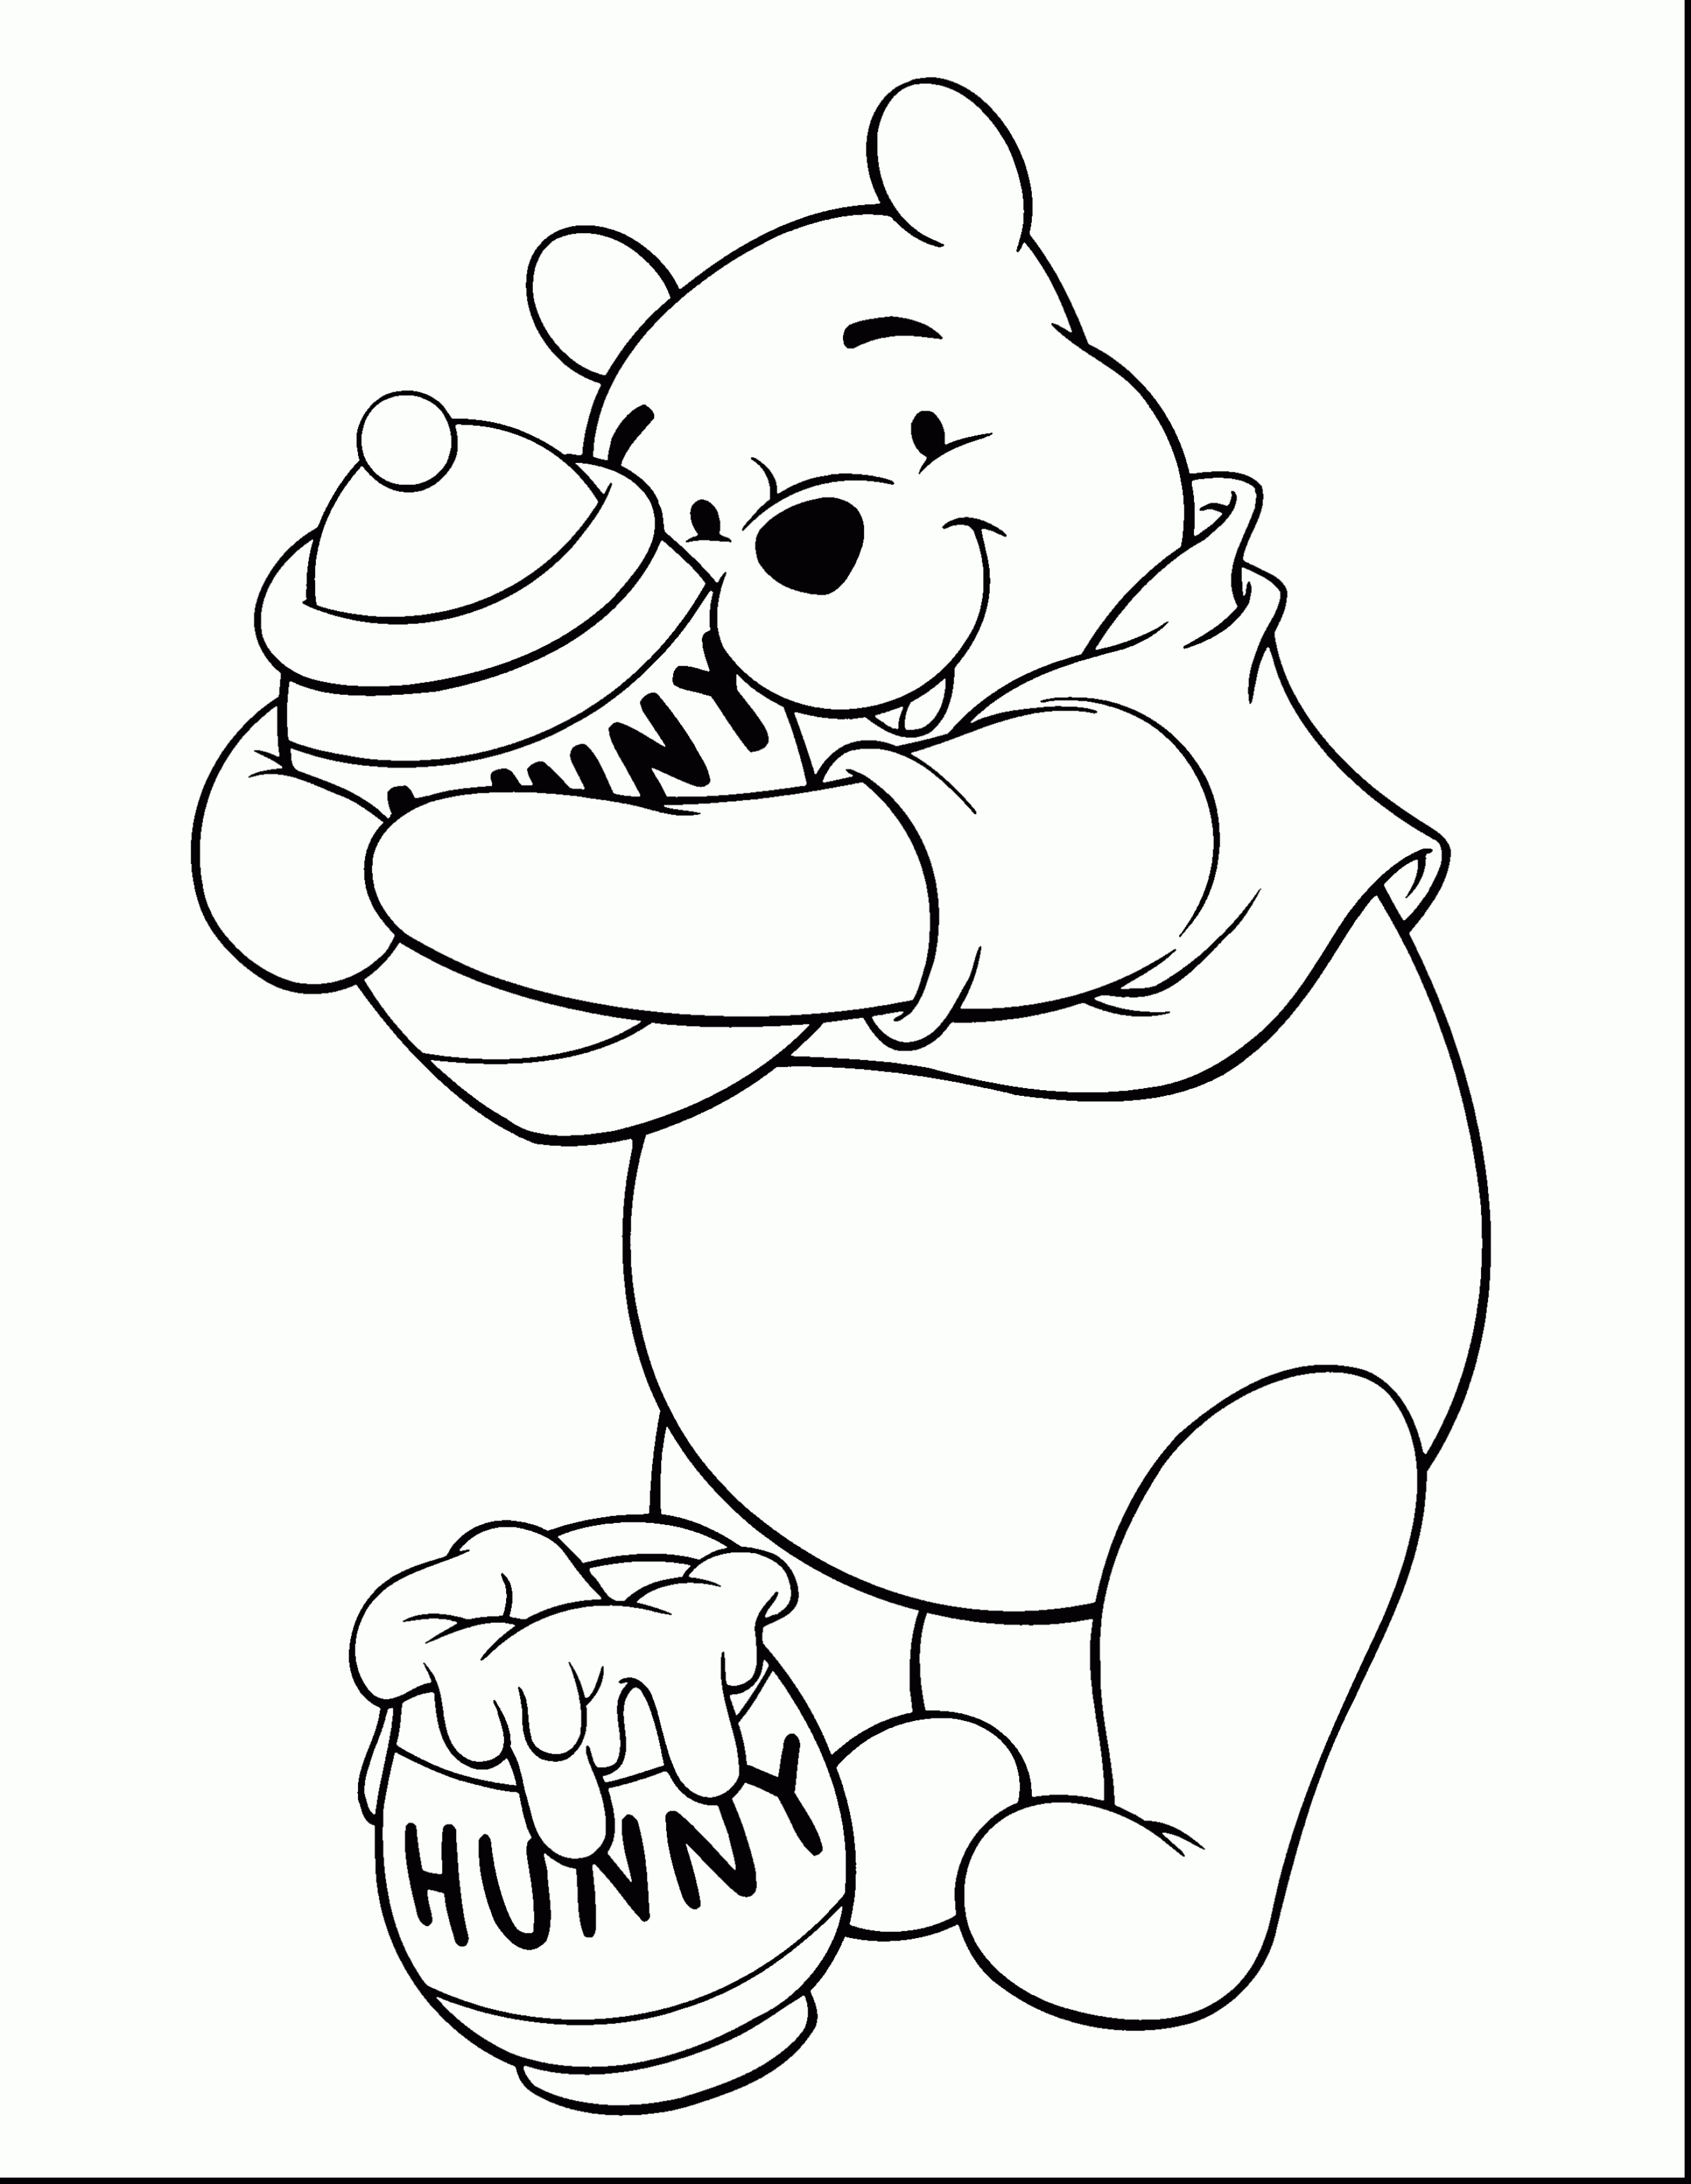 Winnie The Pooh Coloring Pages Online Wennie The Pooh Coloring Pages Free Coloring Library